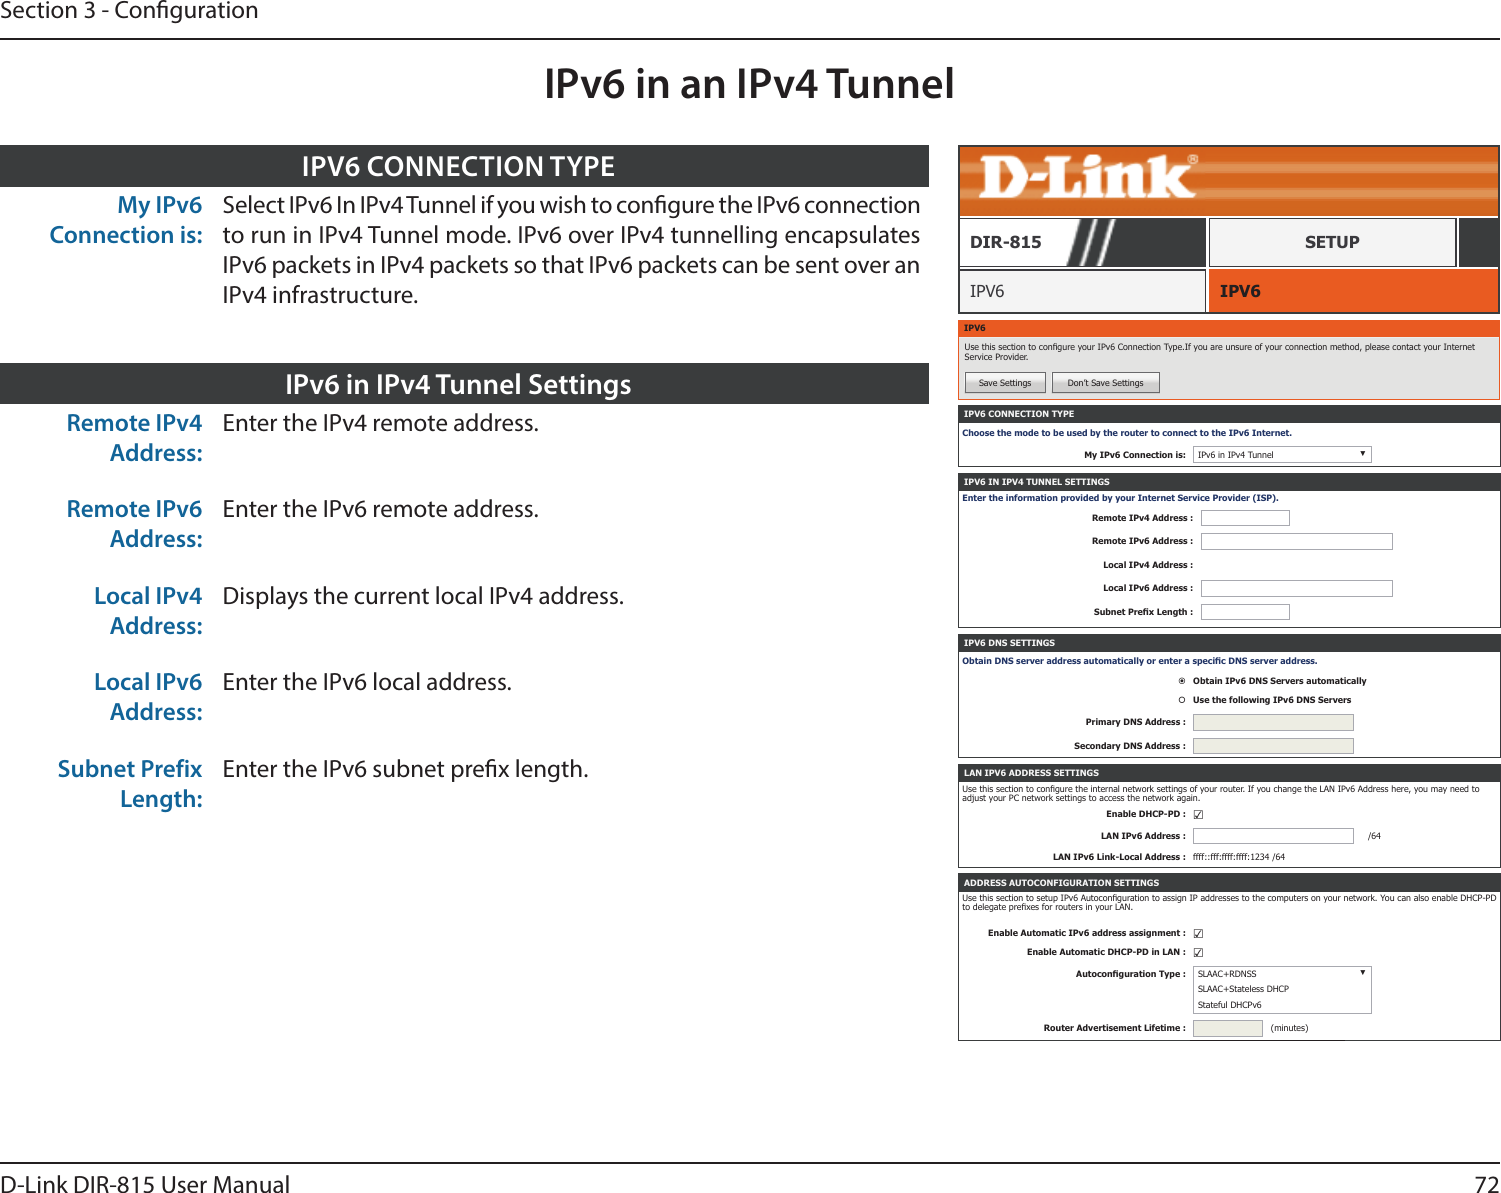 72D-Link DIR-815 User ManualSection 3 - CongurationIPv6 in an IPv4 TunnelIPV6 CONNECTION TYPEChoose the mode to be used by the router to connect to the IPv6 Internet.My IPv6 Connection is: IPv6 in IPv4 Tunnel ▼IPV6 IPV6DIR-815 SETUPIPV6Use this section to congure your IPv6 Connection Type.If you are unsure of your connection method, please contact your Internet Service Provider.Save Settings Don’t Save SettingsIPV6 IN IPV4 TUNNEL SETTINGSEnter the information provided by your Internet Service Provider (ISP).Remote IPv4 Address :Remote IPv6 Address :Local IPv4 Address :Local IPv6 Address :Subnet Prex Length :IPV6 DNS SETTINGSObtain DNS server address automatically or enter a specic DNS server address.Obtain IPv6 DNS Servers automaticallyUse the following IPv6 DNS ServersPrimary DNS Address :Secondary DNS Address :ADDRESS AUTOCONFIGURATION SETTINGSUse this section to setup IPv6 Autoconguration to assign IP addresses to the computers on your network. You can also enable DHCP-PD to delegate prexes for routers in your LAN.Enable Automatic IPv6 address assignment : ☑Enable Automatic DHCP-PD in LAN : ☑Autoconguration Type : SLAAC+RDNSS ▼SLAAC+Stateless DHCPStateful DHCPv6Router Advertisement Lifetime : (minutes)LAN IPV6 ADDRESS SETTINGSUse this section to congure the internal network settings of your router. If you change the LAN IPv6 Address here, you may need to adjust your PC network settings to access the network again.Enable DHCP-PD : ☑LAN IPv6 Address : /64LAN IPv6 Link-Local Address : ffff::fff:ffff:ffff:1234 /64My IPv6 Connection is:Select IPv6 In IPv4 Tunnel if you wish to congure the IPv6 connection to run in IPv4 Tunnel mode. IPv6 over IPv4 tunnelling encapsulates IPv6 packets in IPv4 packets so that IPv6 packets can be sent over an IPv4 infrastructure.IPV6 CONNECTION TYPERemote IPv4 Address:Enter the IPv4 remote address.Remote IPv6 Address:Enter the IPv6 remote address.Local IPv4 Address:Displays the current local IPv4 address.Local IPv6 Address:Enter the IPv6 local address.Subnet Prefix Length:Enter the IPv6 subnet prex length.IPv6 in IPv4 Tunnel Settings